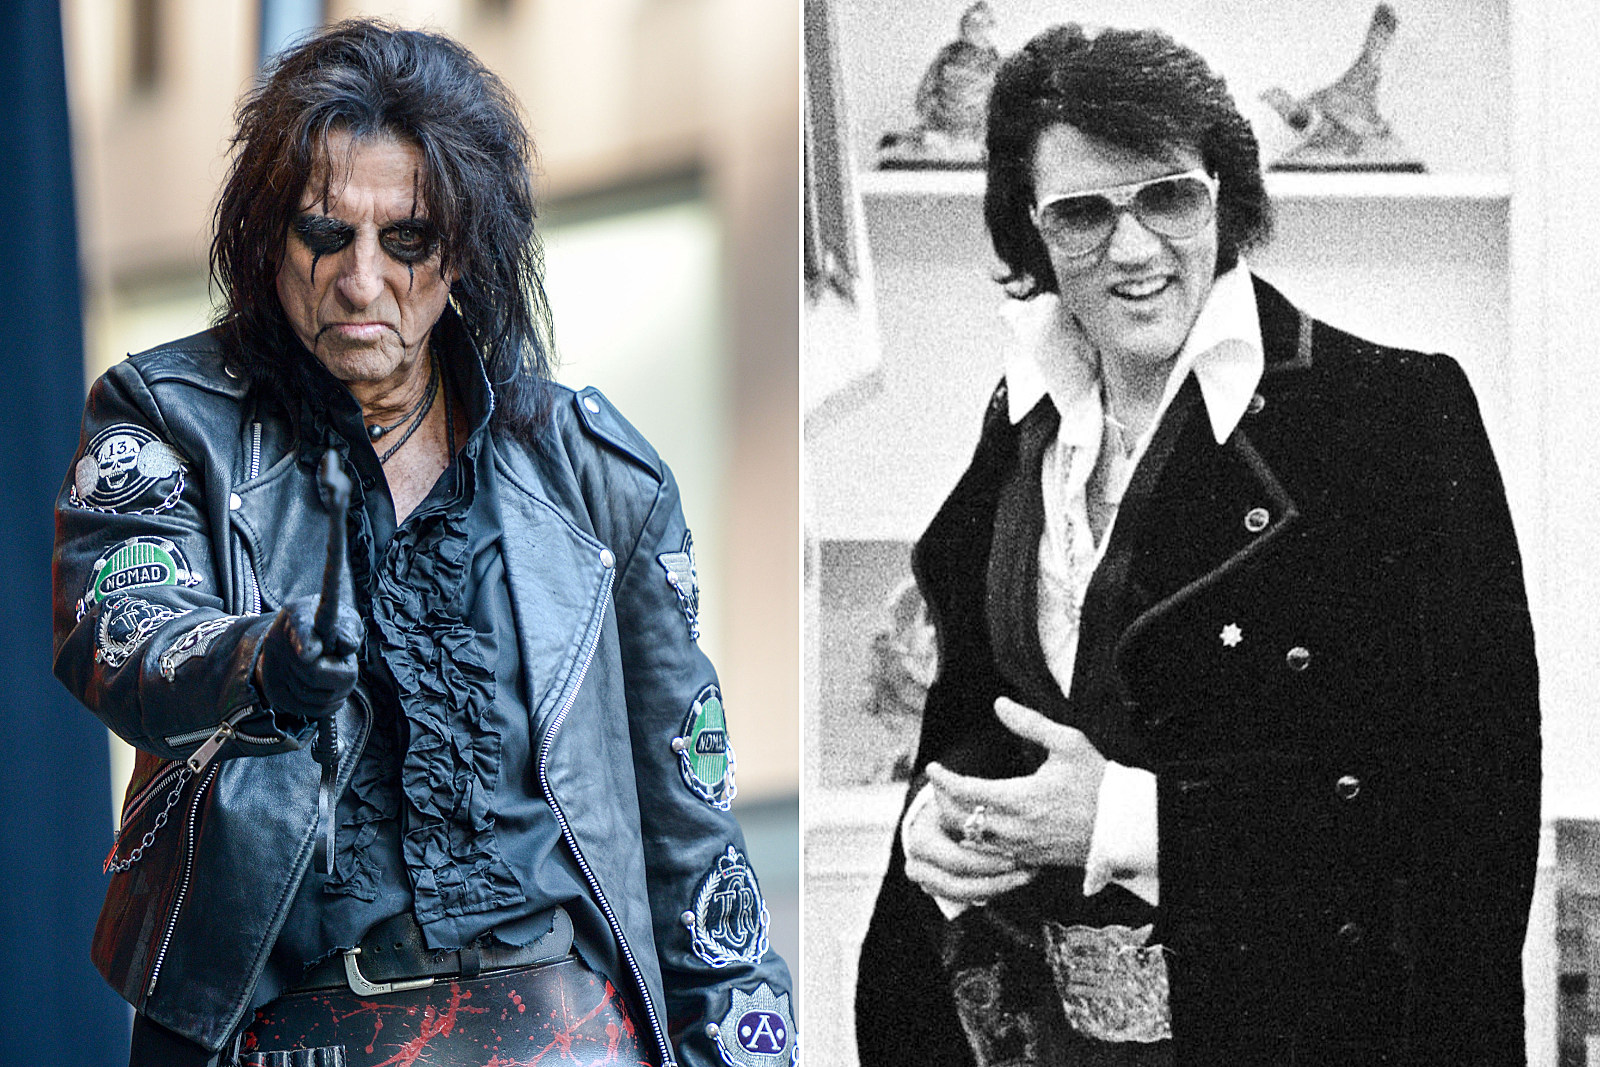 Leather Porn Star Presley - When Alice Cooper Pointed a Loaded Gun at Elvis Presley